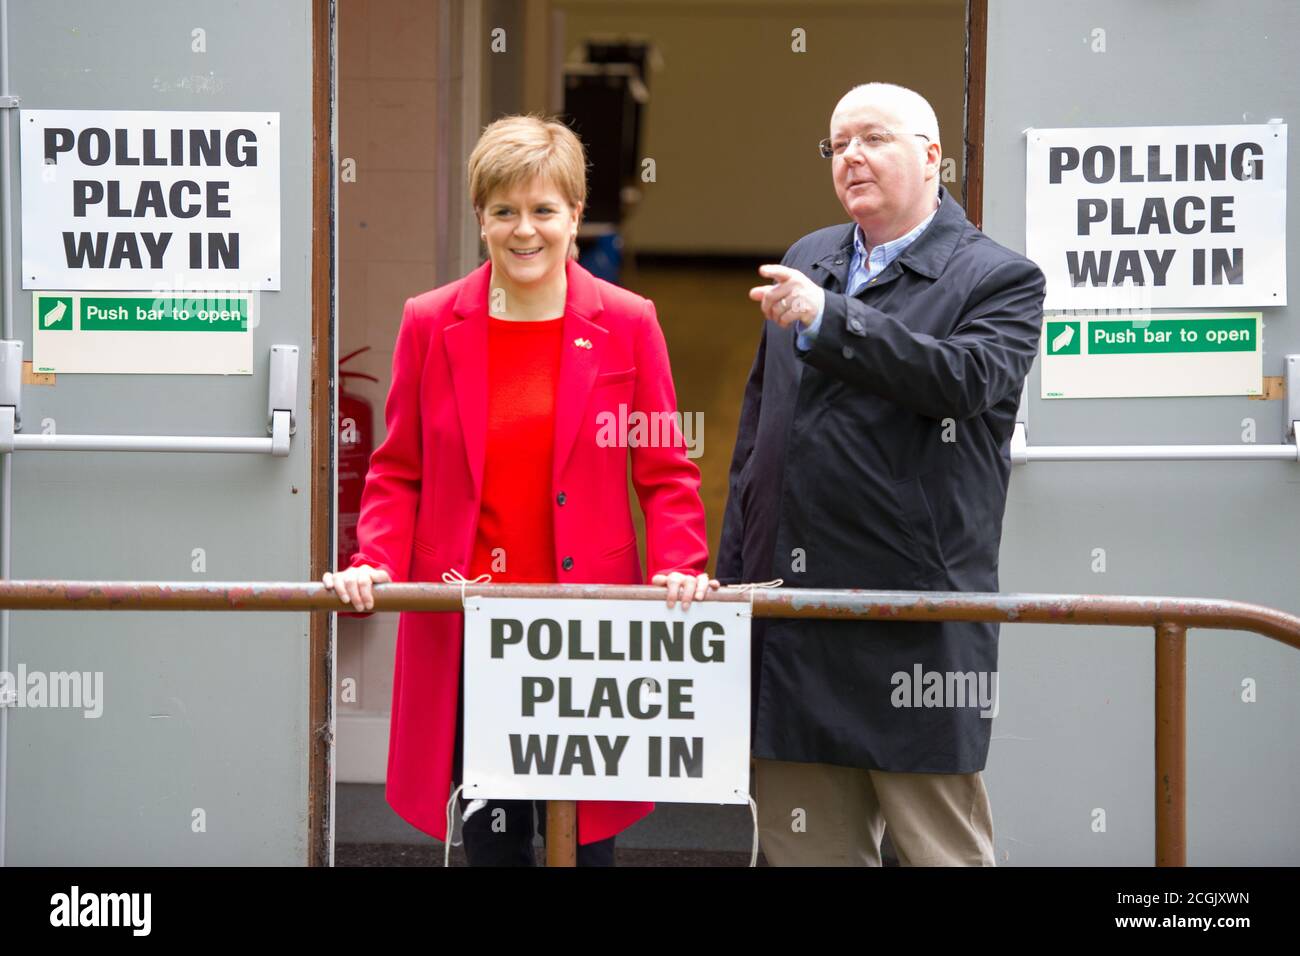 Uddingston, Scotland, UK.  Pictured: (left) Nicola Sturgeon - First Minister of Scotland and Leader of the Scottish National Party (SNP), seen with her husband, (right) Peter Murrell CEO of the Scottish National Party (SNP), visiting her local polling station to cast her vote in the European Elections for the SNP to keep Scotland in Europe. Credit: Colin Fisher/Alamy Live News. Stock Photo